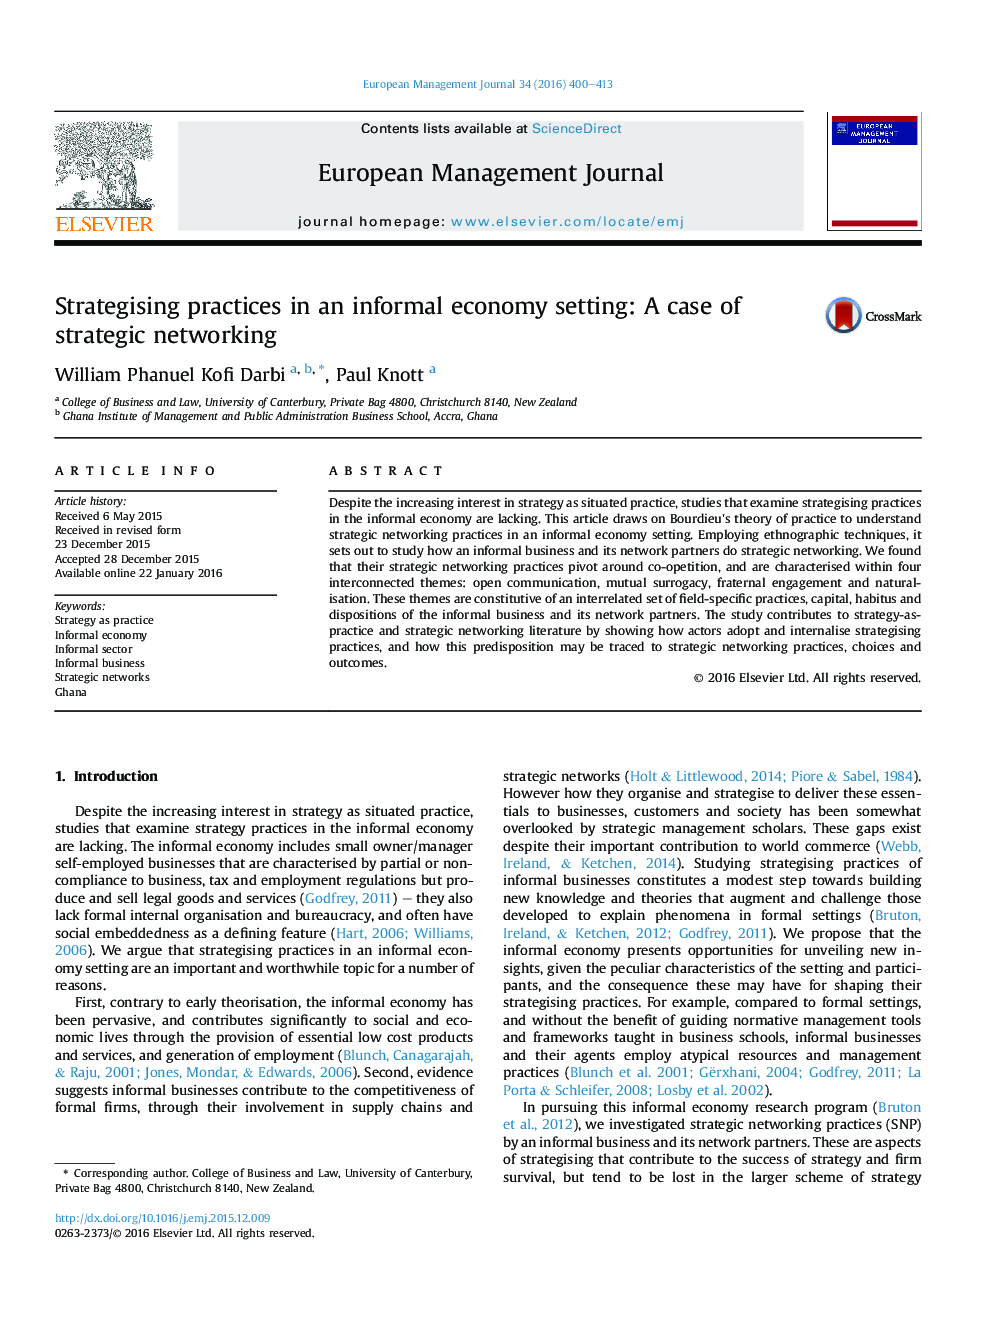 Strategising practices in an informal economy setting: A case of strategic networking